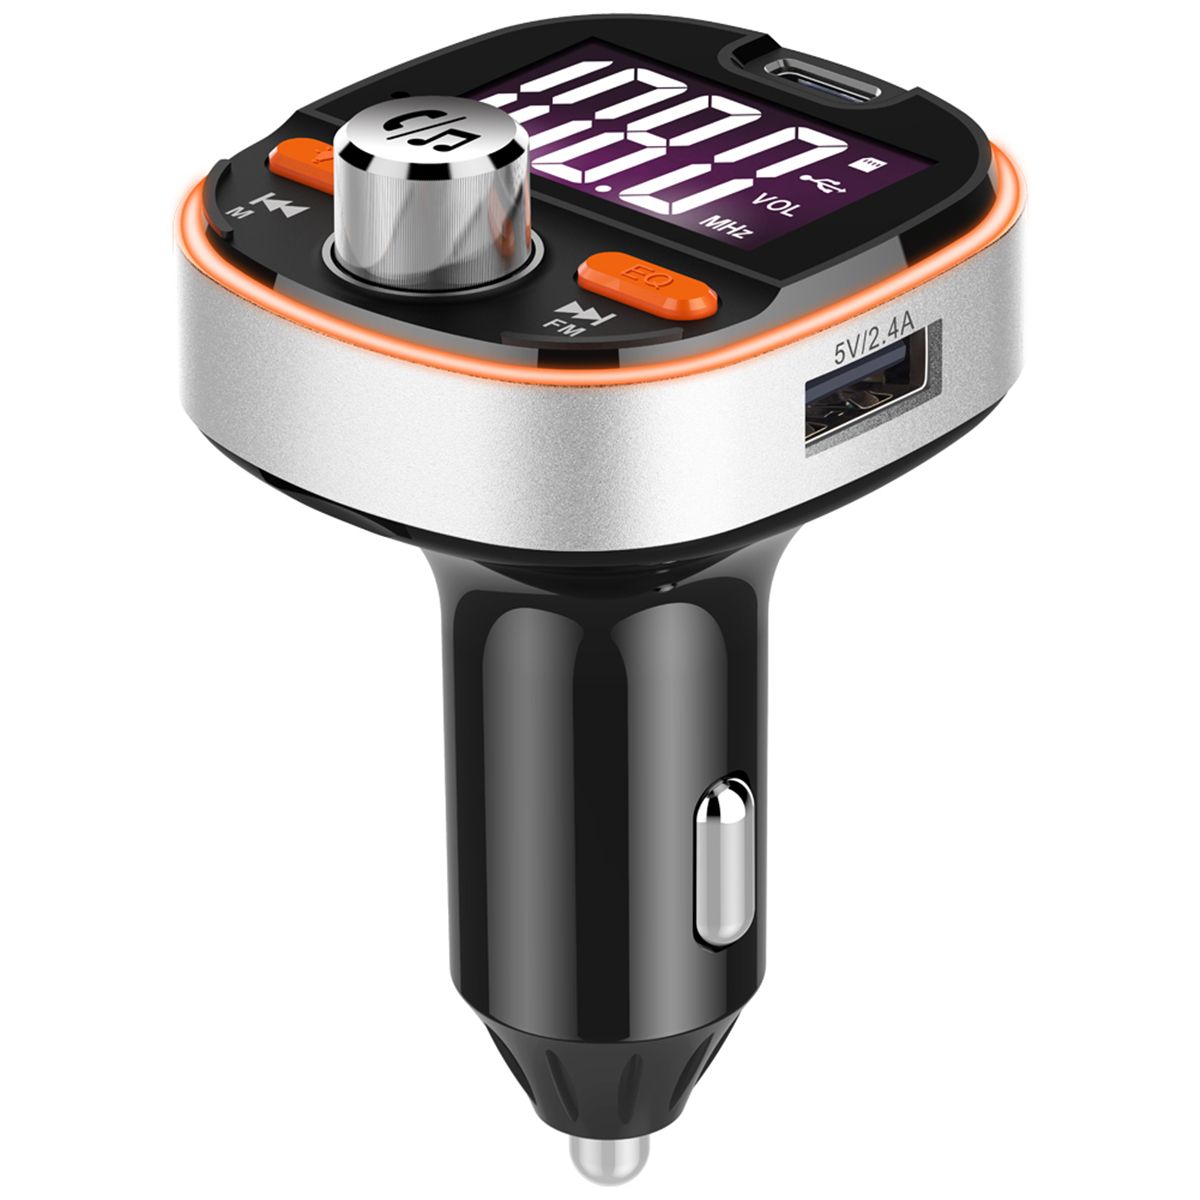 Car Bluetooth MP3 Player FM Transmitter with Colorful Atmosphere Light Support QC 3.0 Fast Charging Subwoofer DSP TF Card USB - Auto GoShop